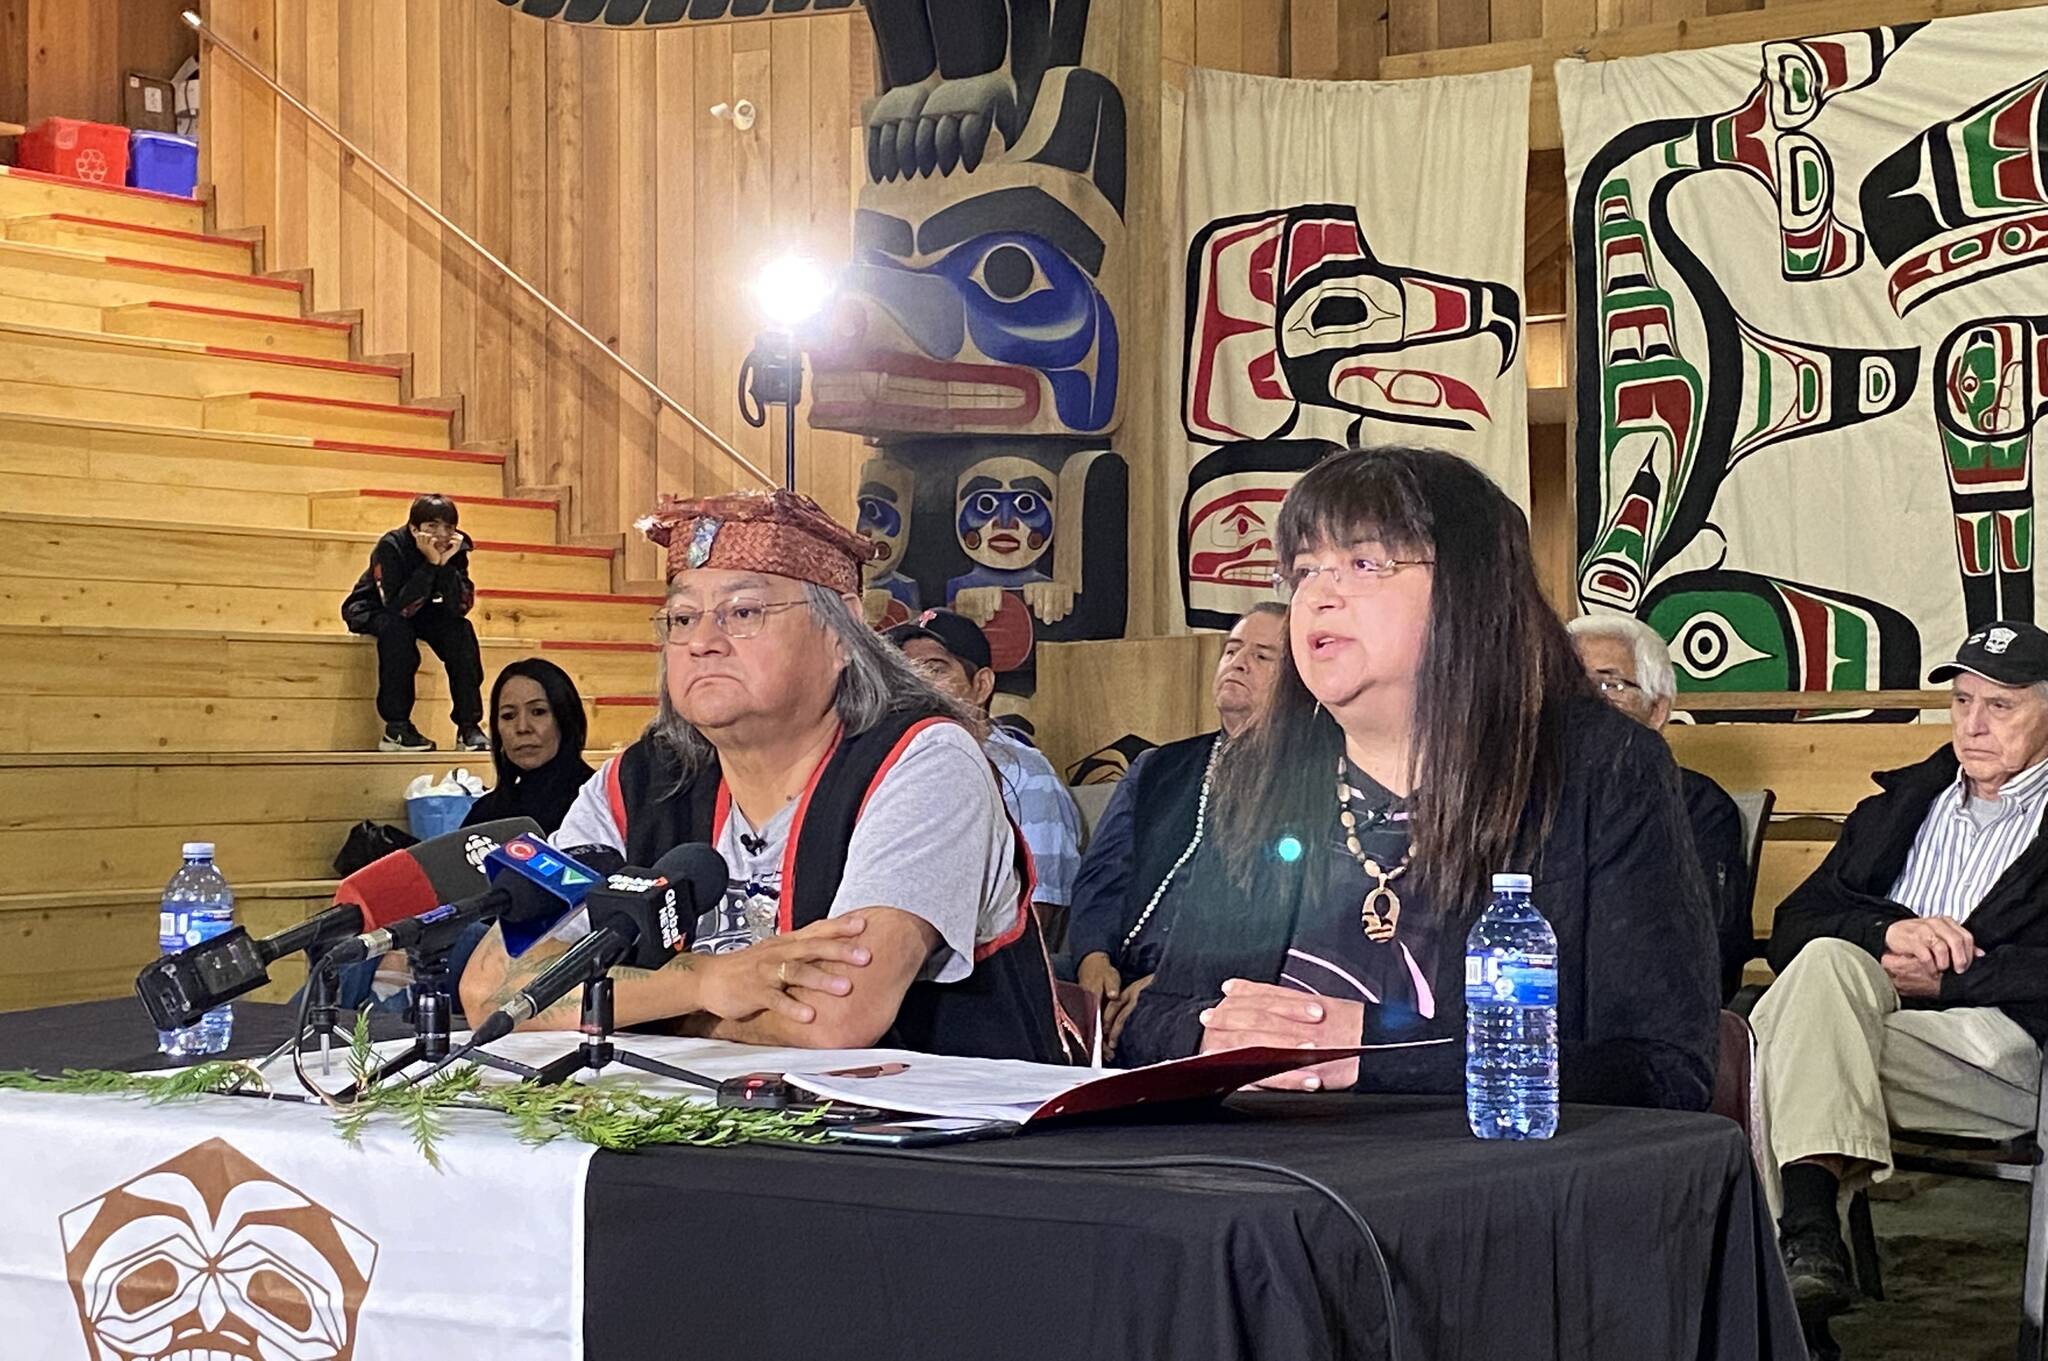 Heiltsuk First Nation man Maxwell Johnson and elected Chief Marilyn Slett at a news conference on Monday, Oct. 24, 2022. (Jane Skrypnek/Black Press Media)